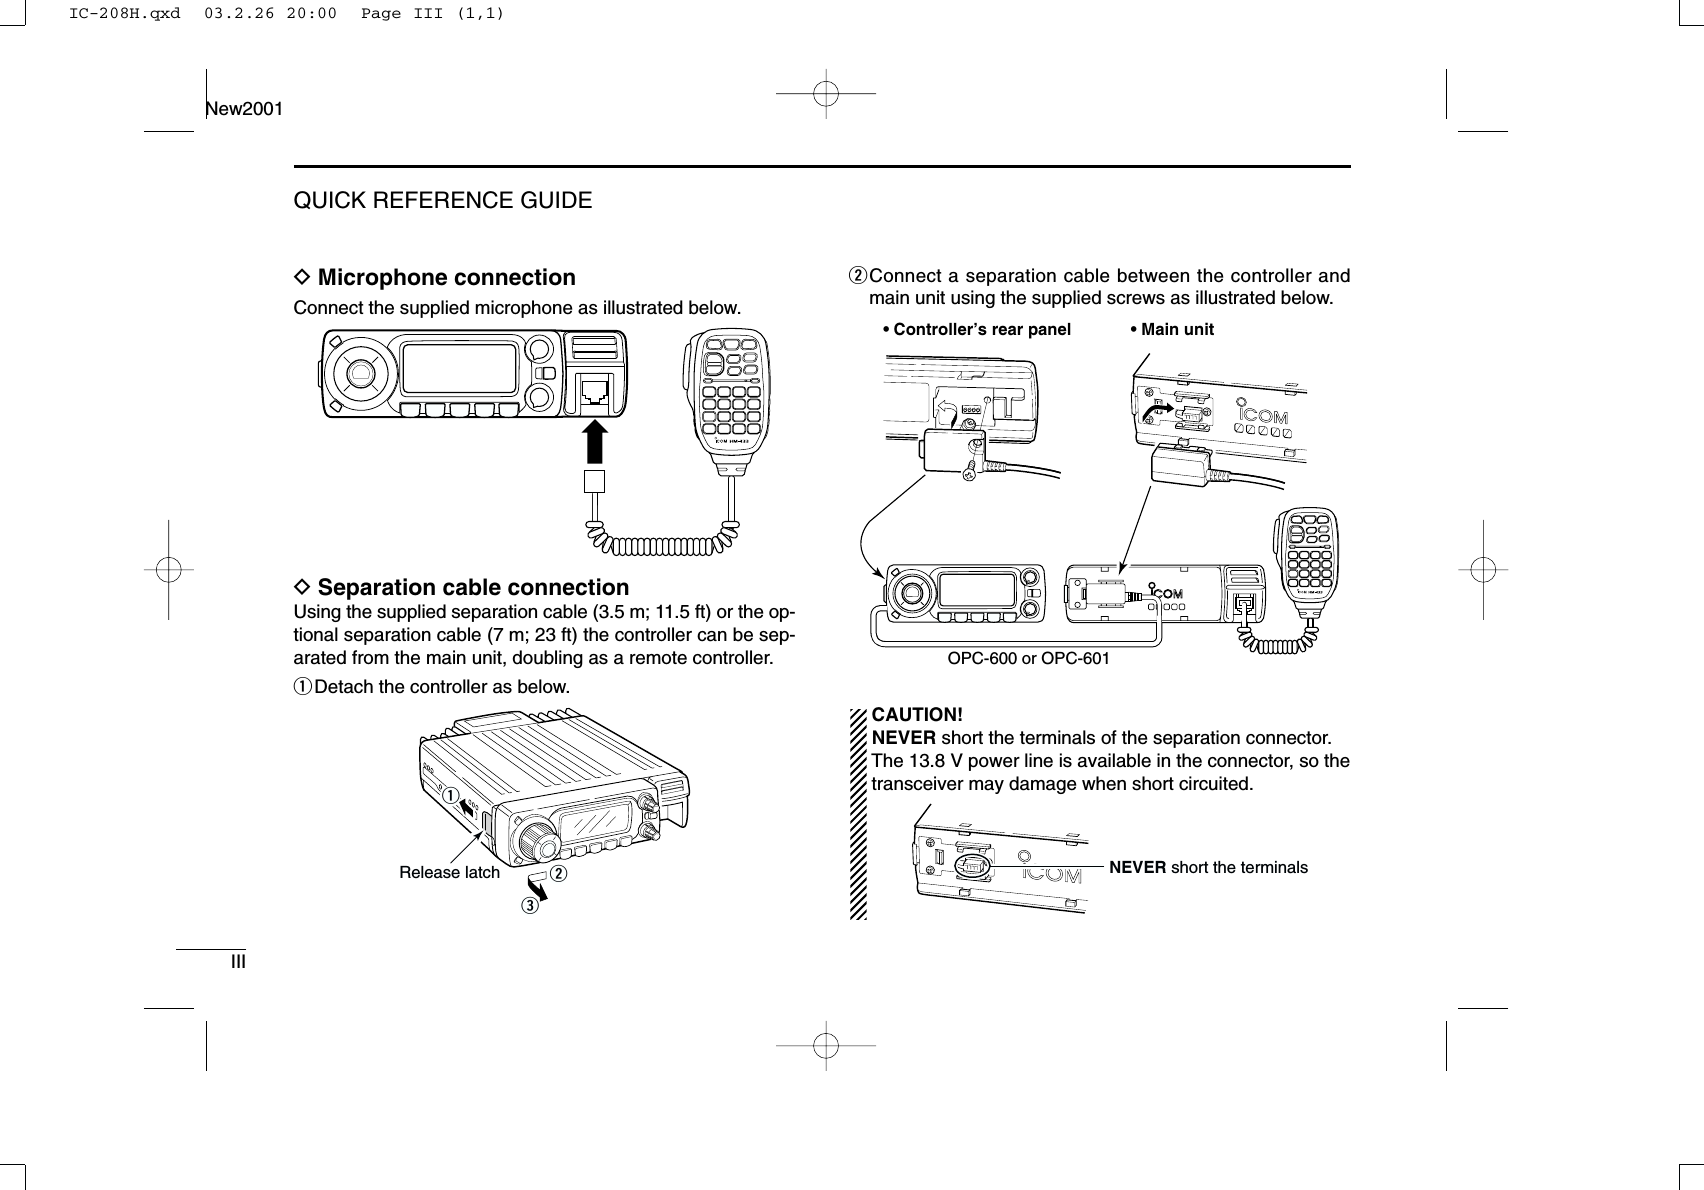 IIIQUICK REFERENCE GUIDENew2001DMicrophone connectionConnect the supplied microphone as illustrated below.DSeparation cable connectionUsing the supplied separation cable (3.5 m; 11.5 ft) or the op-tional separation cable (7 m; 23 ft) the controller can be sep-arated from the main unit, doubling as a remote controller.qDetach the controller as below.wConnect a separation cable between the controller andmain unit using the supplied screws as illustrated below.CAUTION!NEVER short the terminals of the separation connector.The 13.8 V power line is available in the connector, so thetransceiver may damage when short circuited.NEVER short the terminals• Controller’s rear panel • Main unitOPC-600 or OPC-601qweRelease latchIC-208H.qxd  03.2.26 20:00  Page III (1,1)